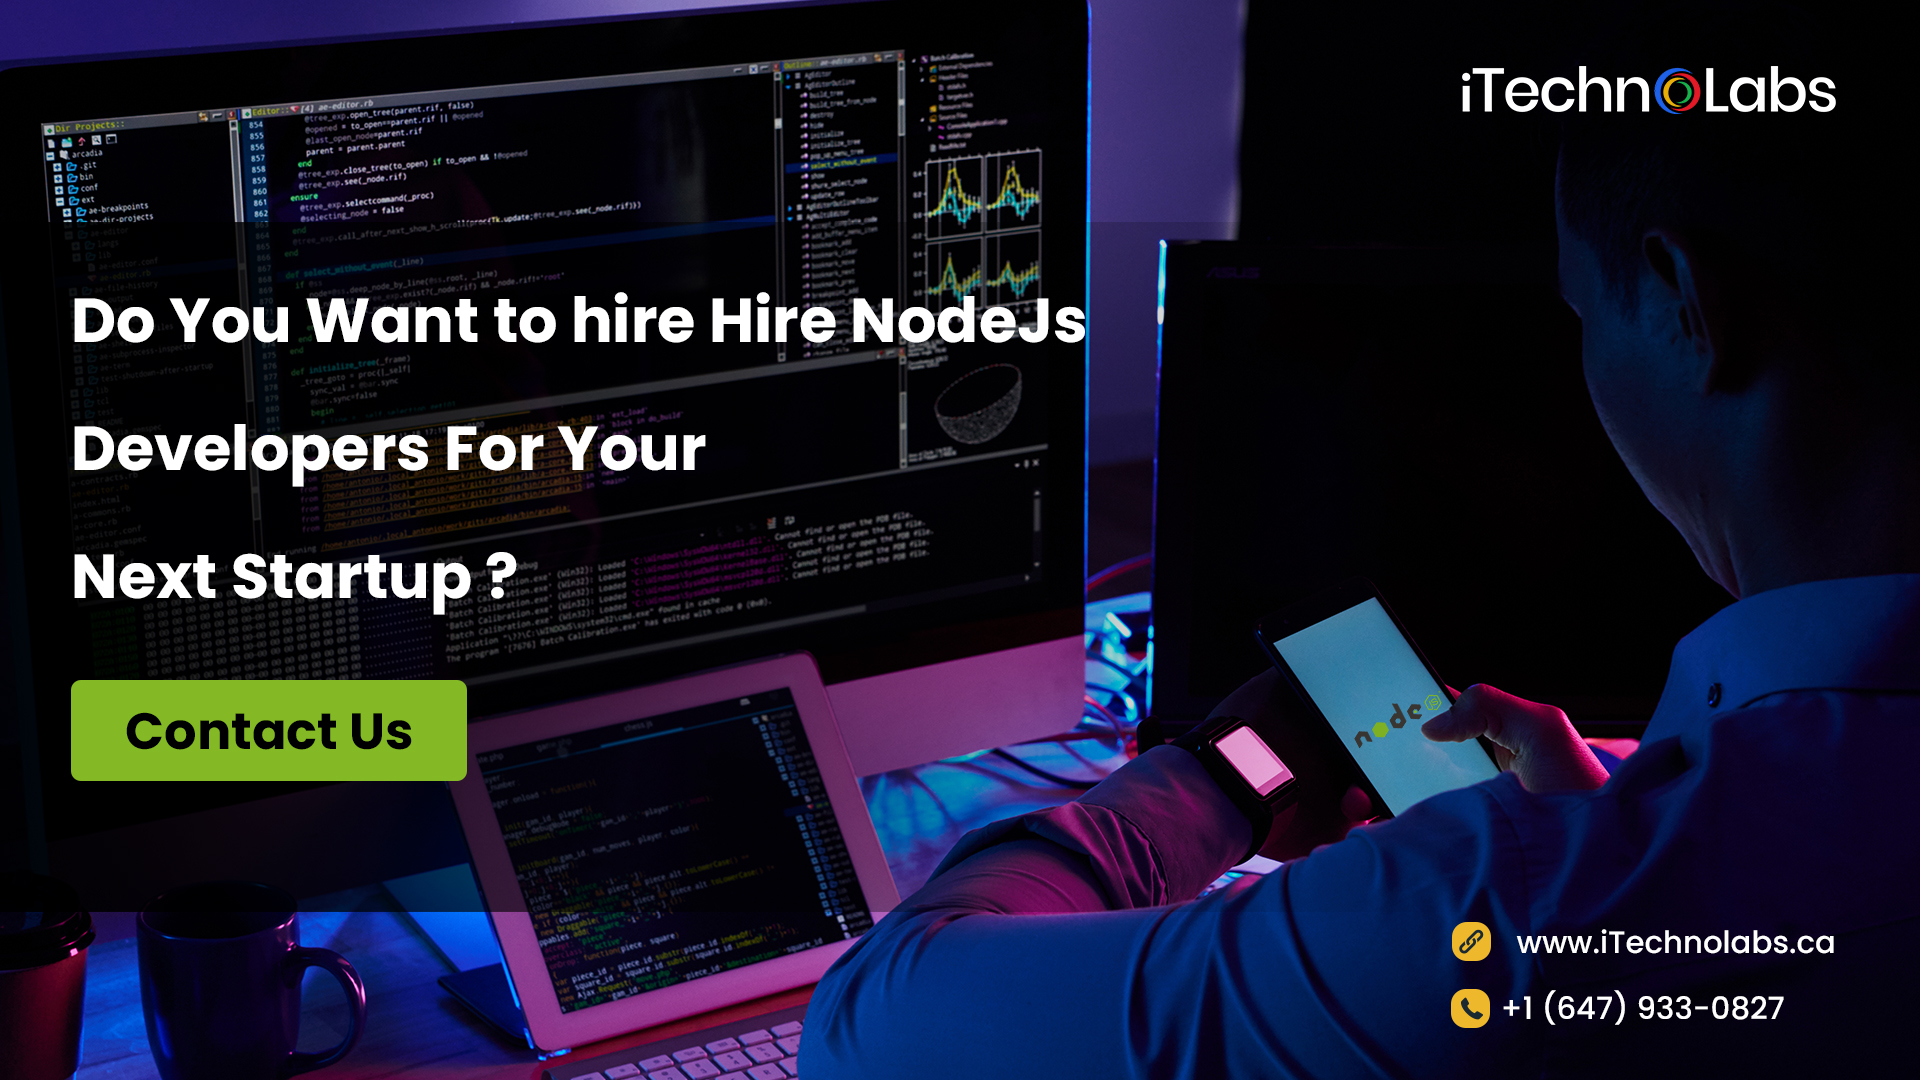 hire nodejs developers for your next startup itechnolabs